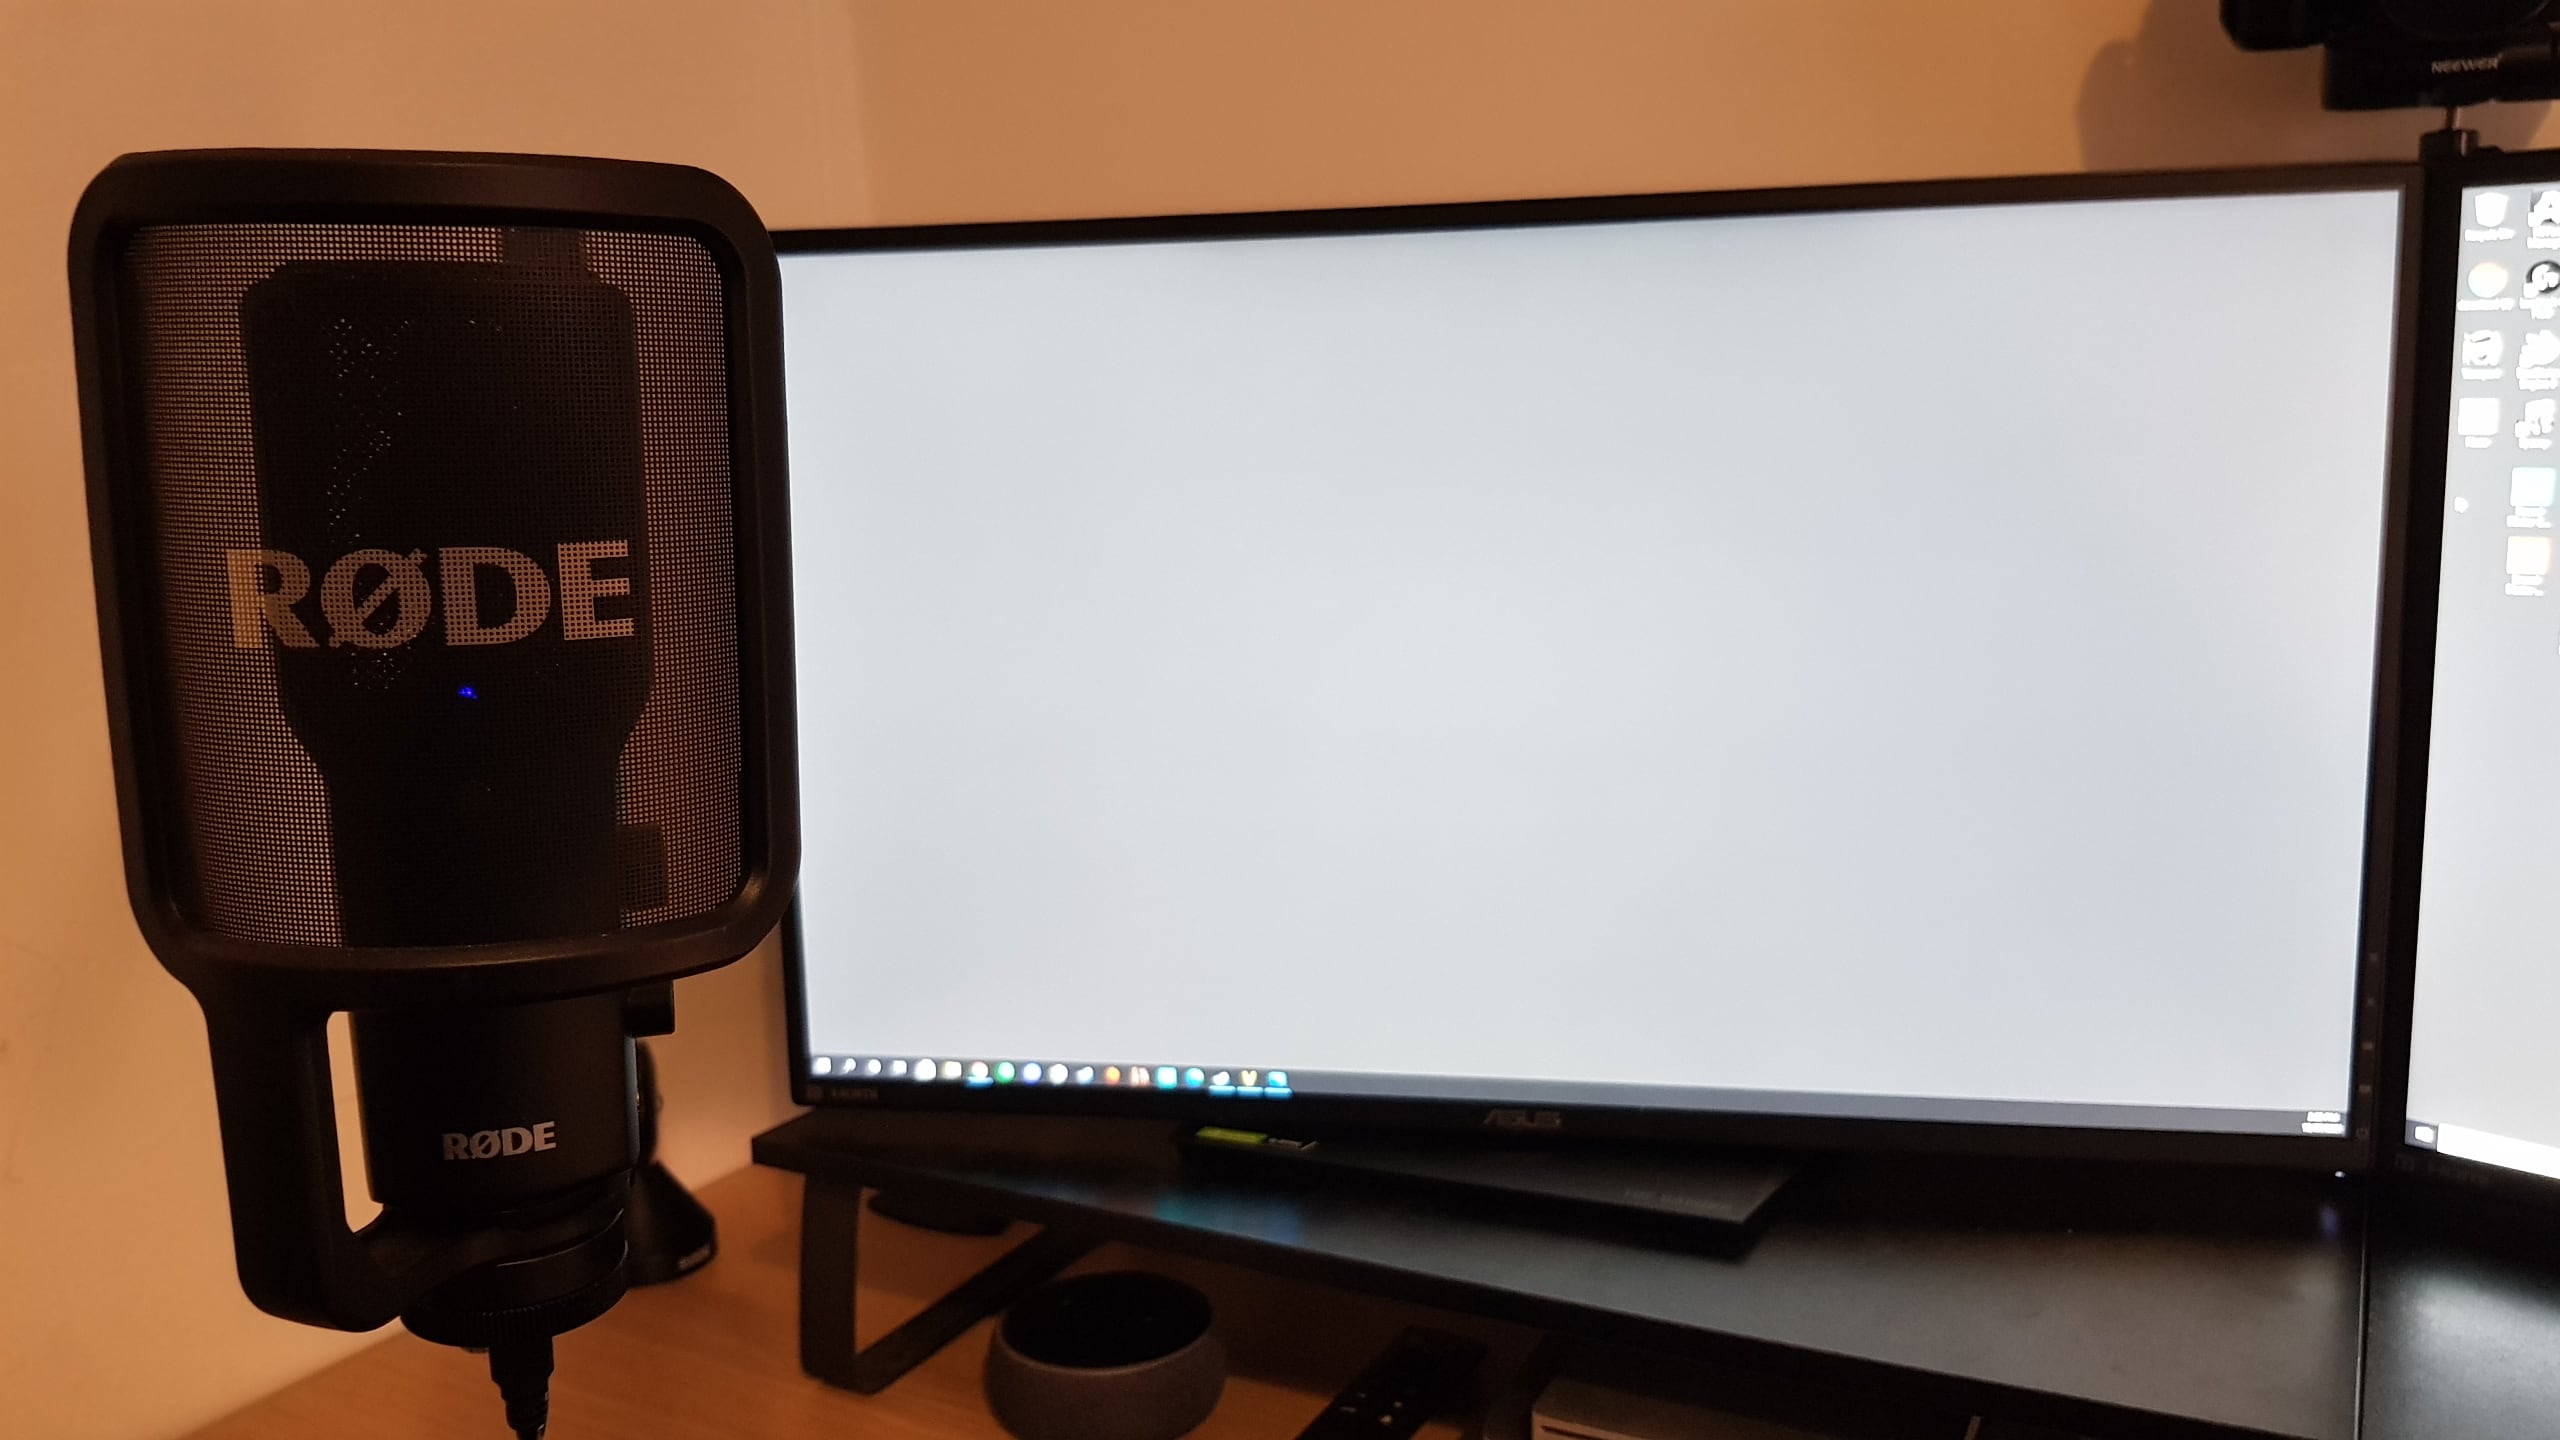 "This is sitting at the desk when using it...the mic doesn't interfere at all with viewing for the left screen, and is in perfect range," omgaporksword wrote.